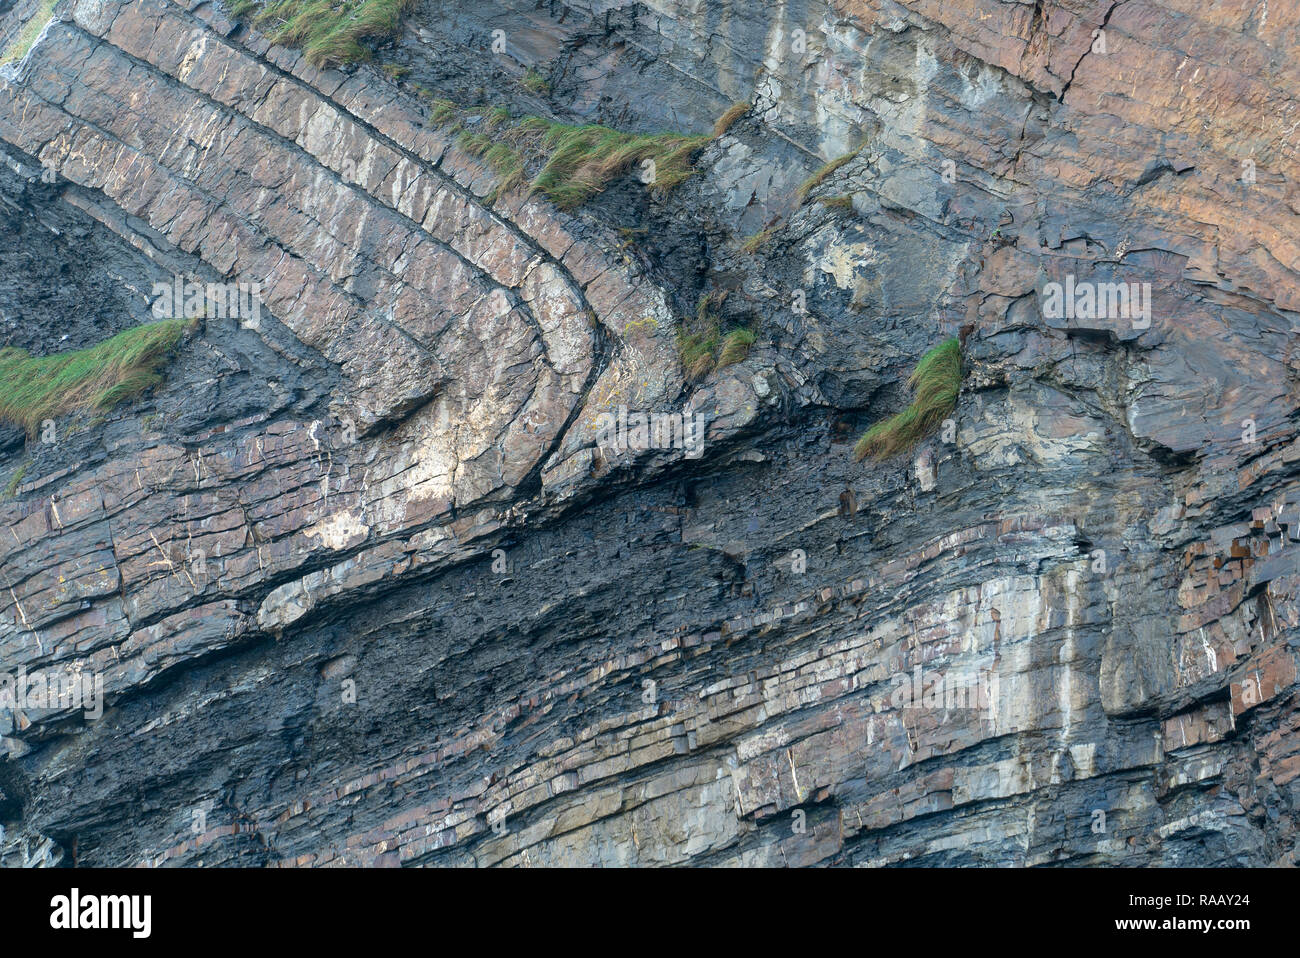 Spectacularly folded sequence of alternating grey shales and sandstones detail [3 of 5], North Cornwall UK Stock Photo